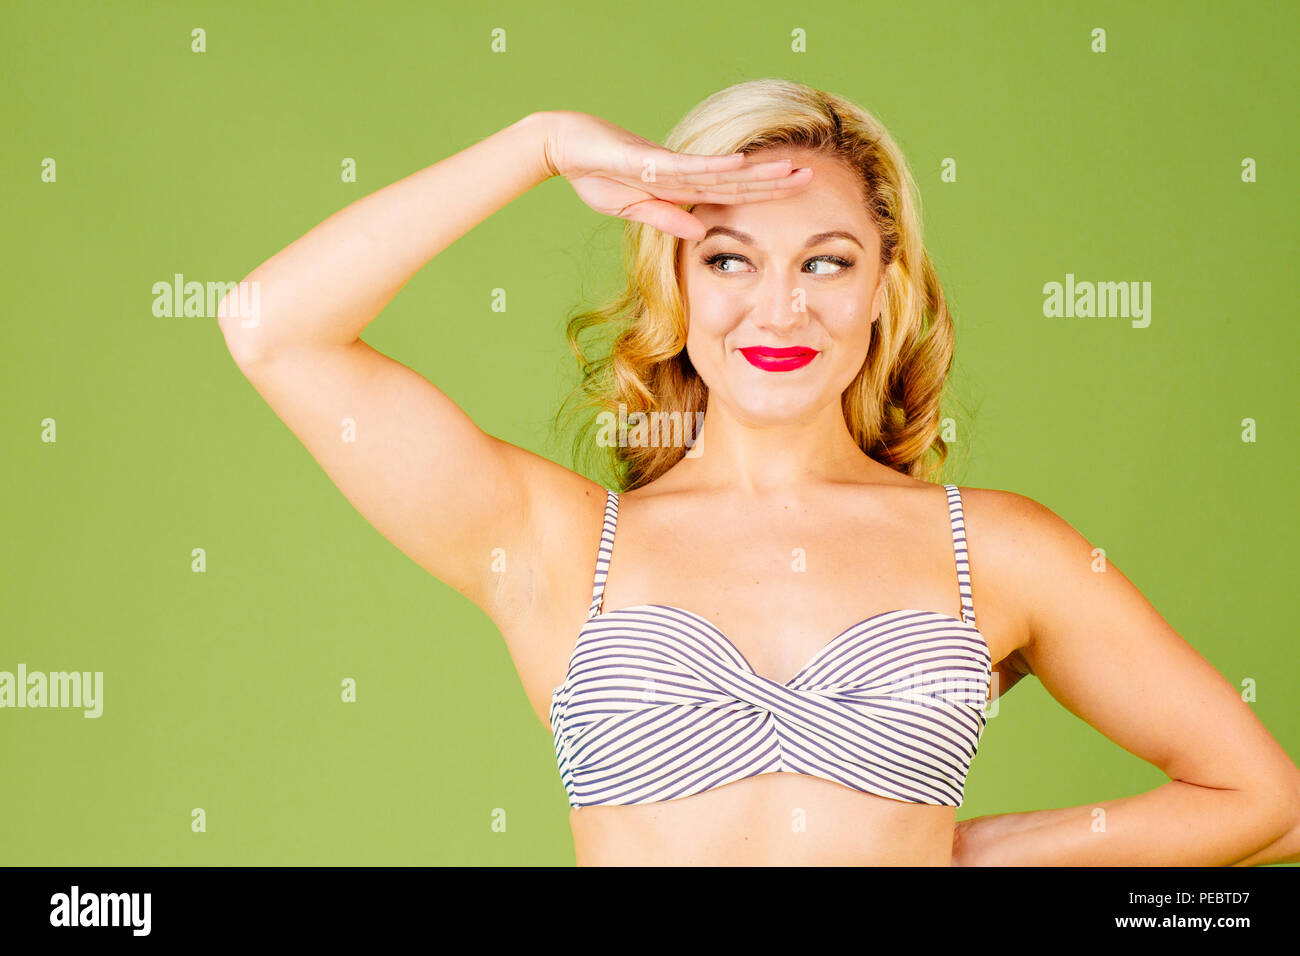 Close up portrait of a happy blonde woman in bikini with  hand by her forehead, isolated on green studio background Stock Photo